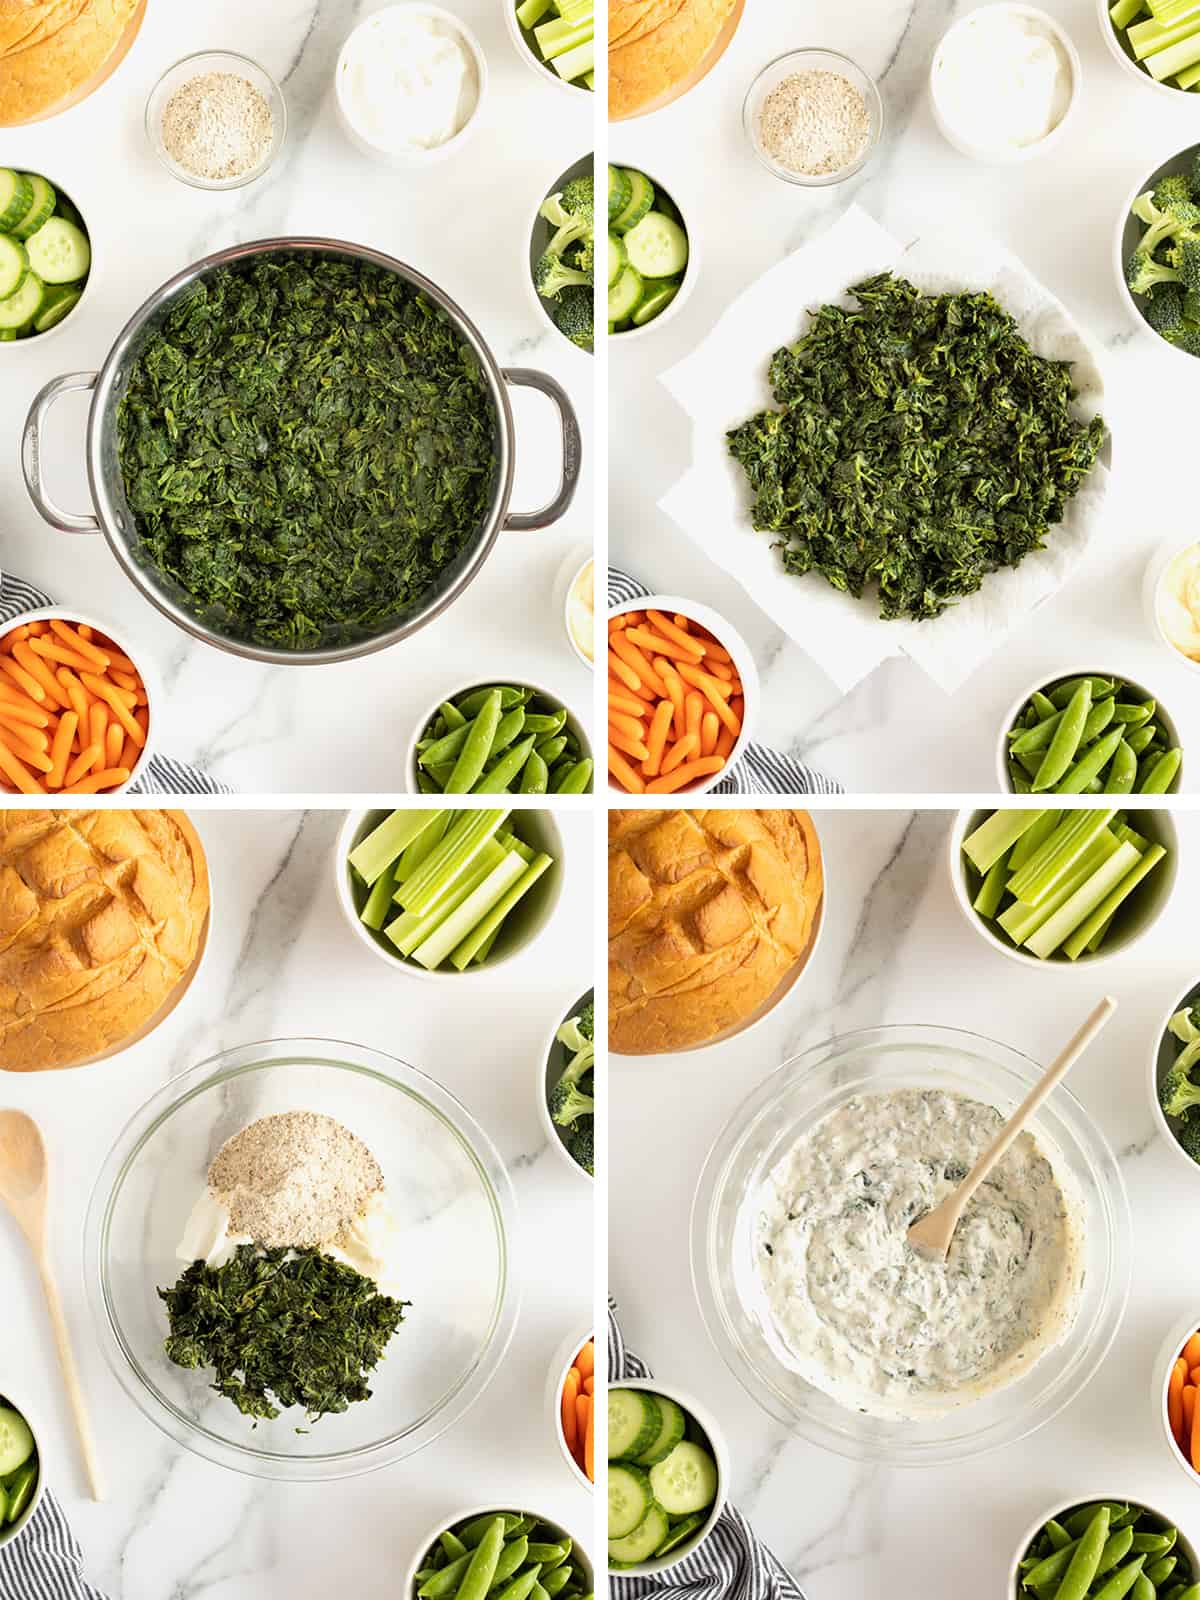 Steps to making a cold spinach dip.